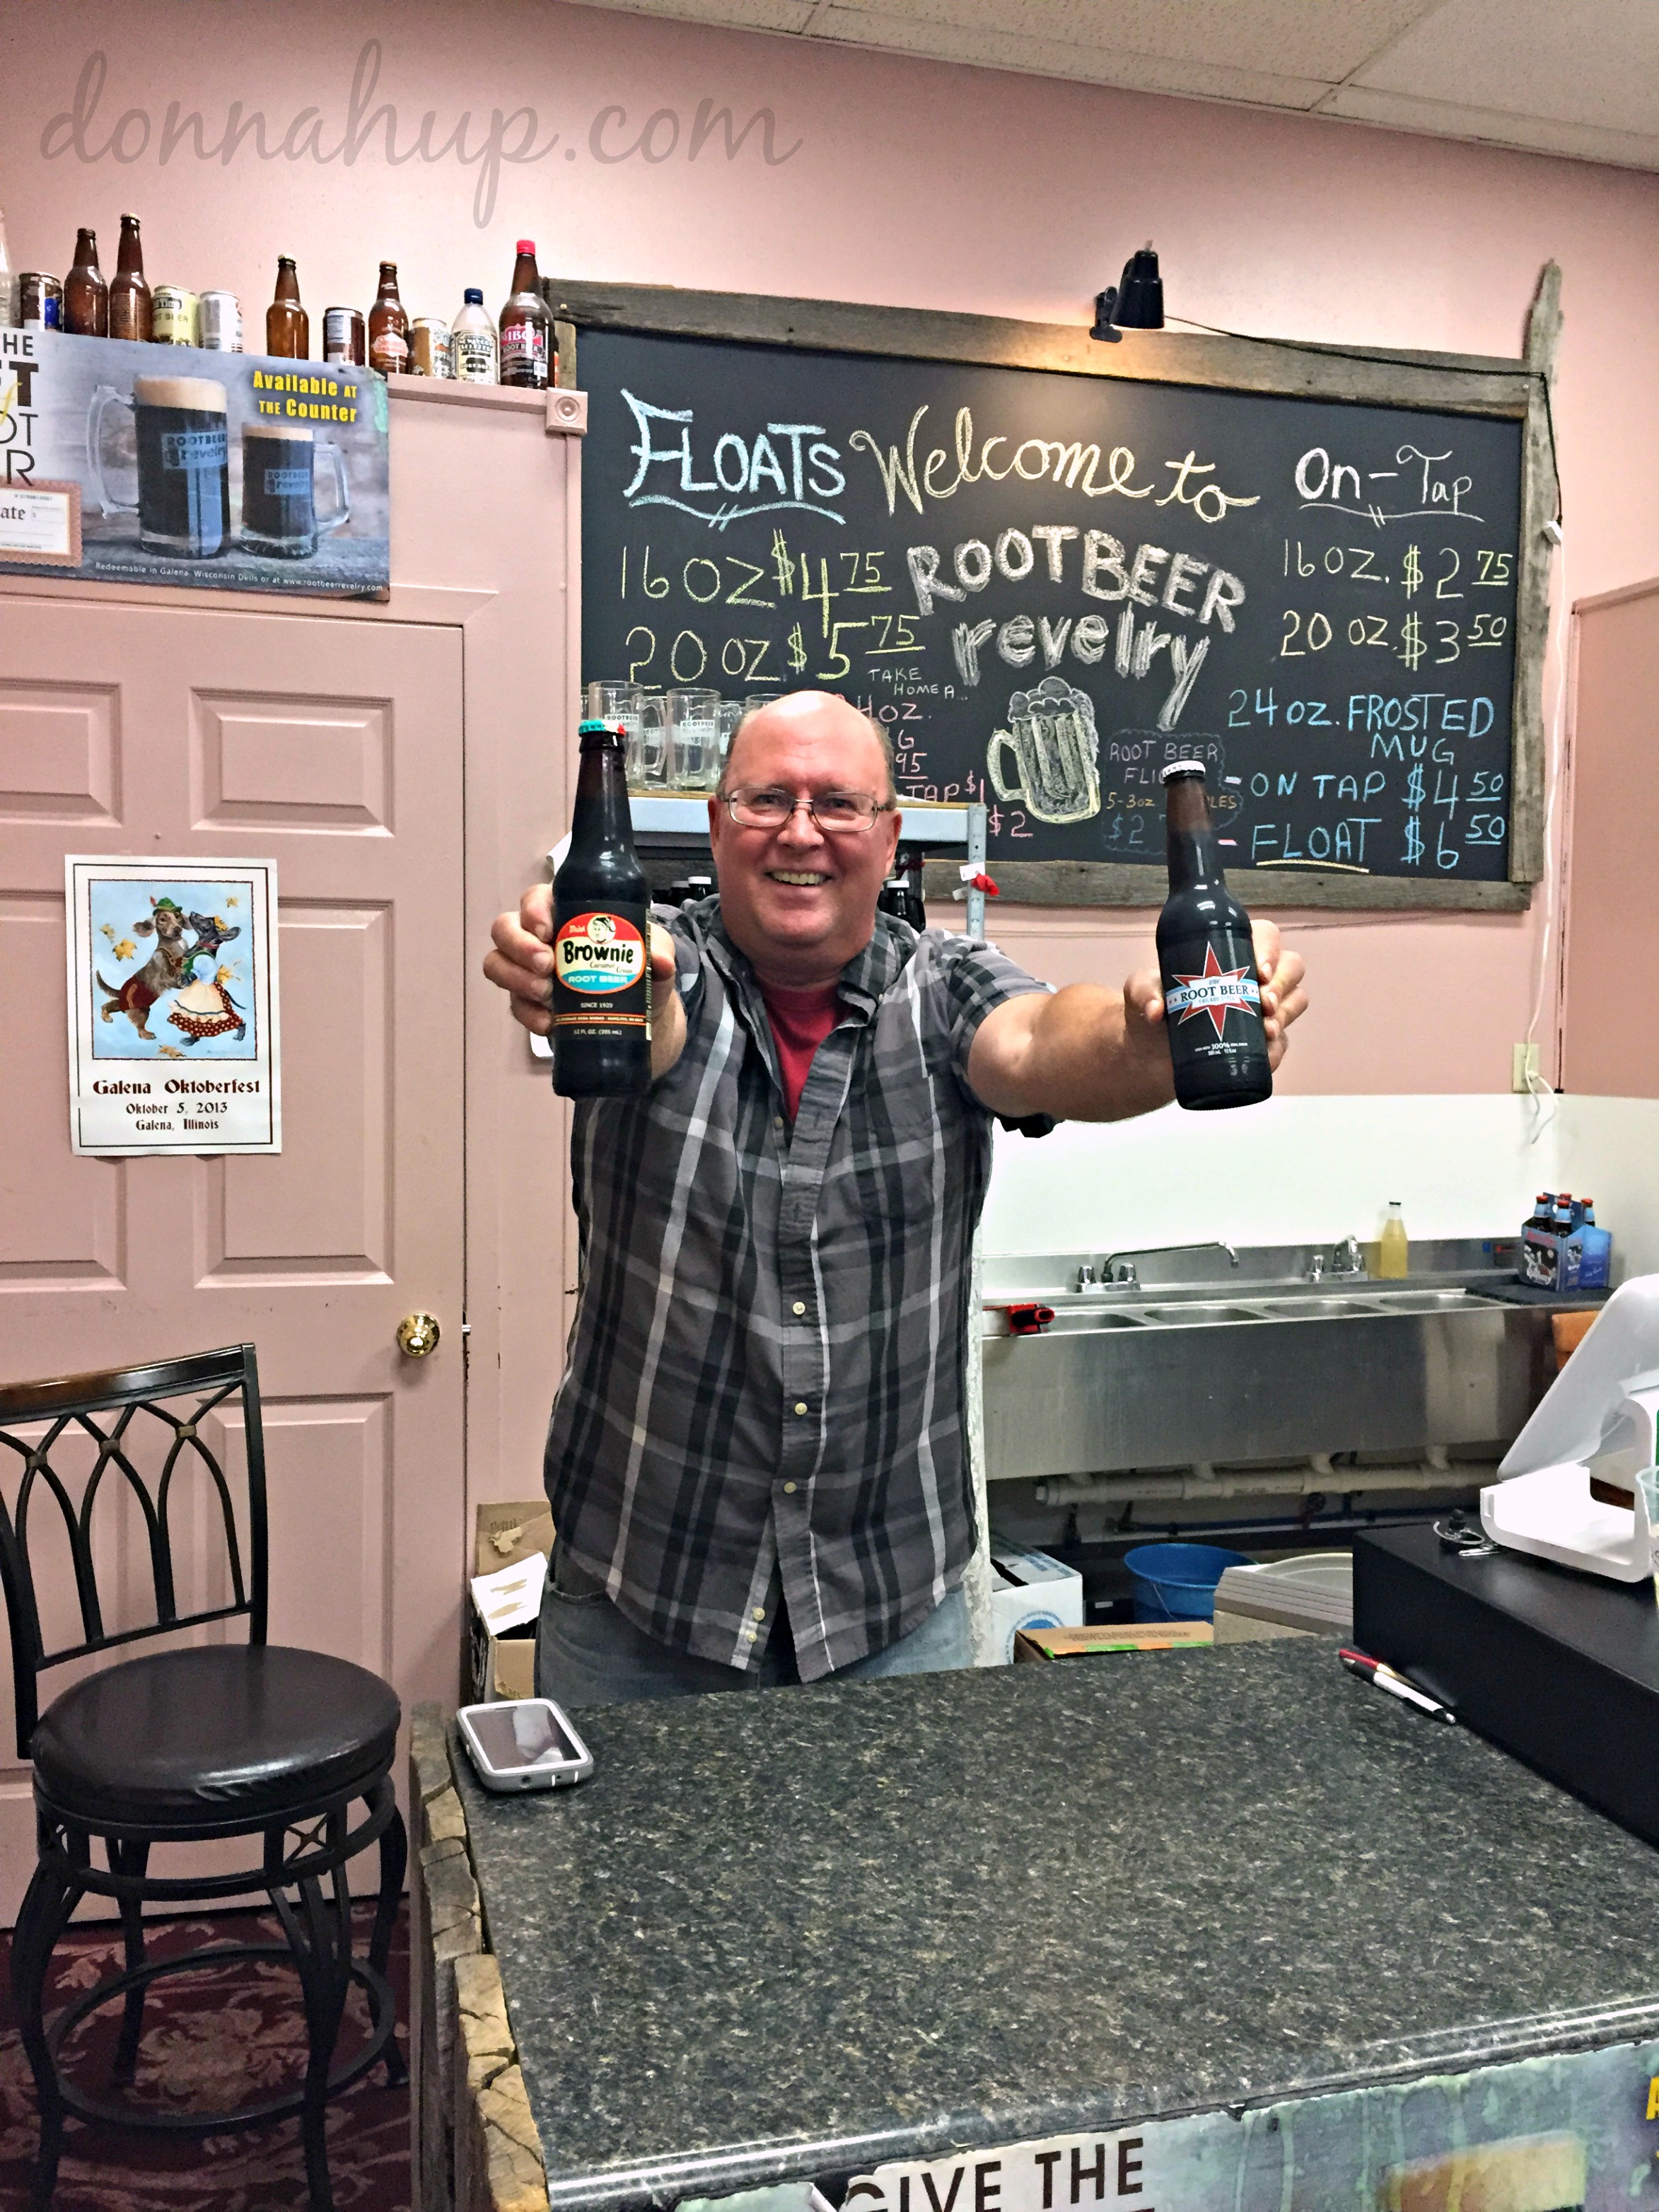 You have to check out Root Beer Revelry in Galena